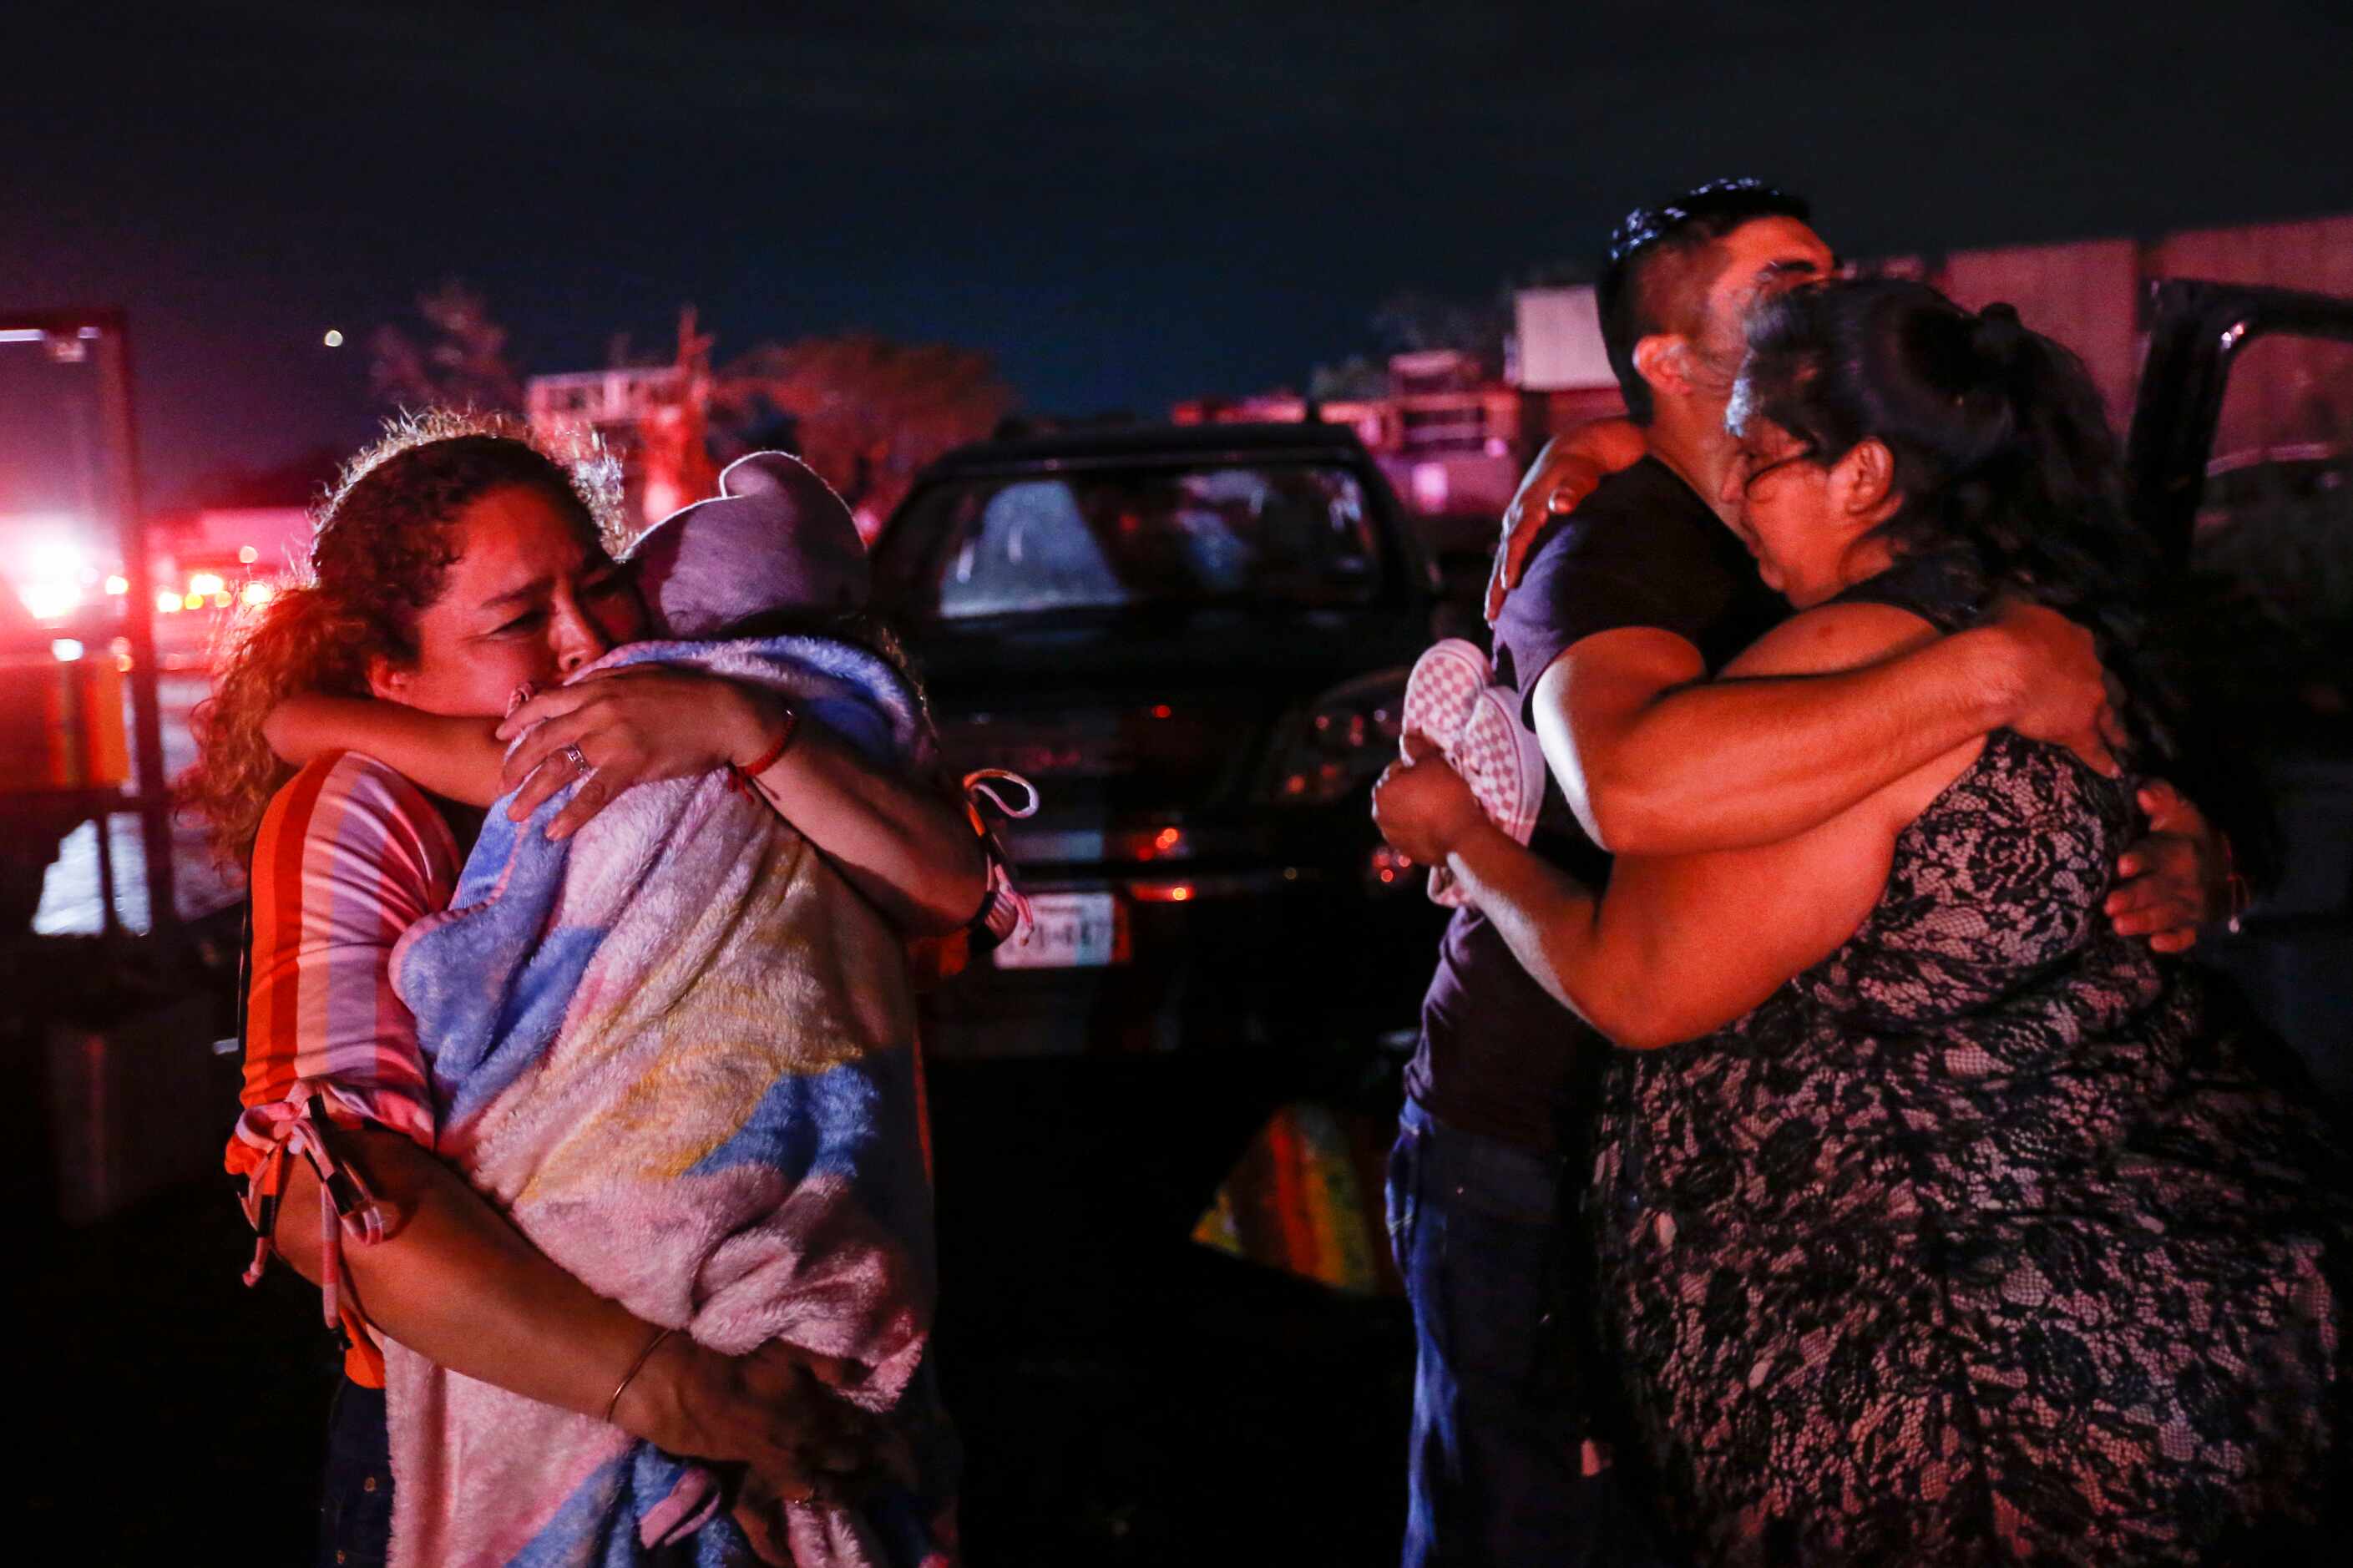 Family members embrace after reuniting after a storm near the intersection of Walnut Hill...